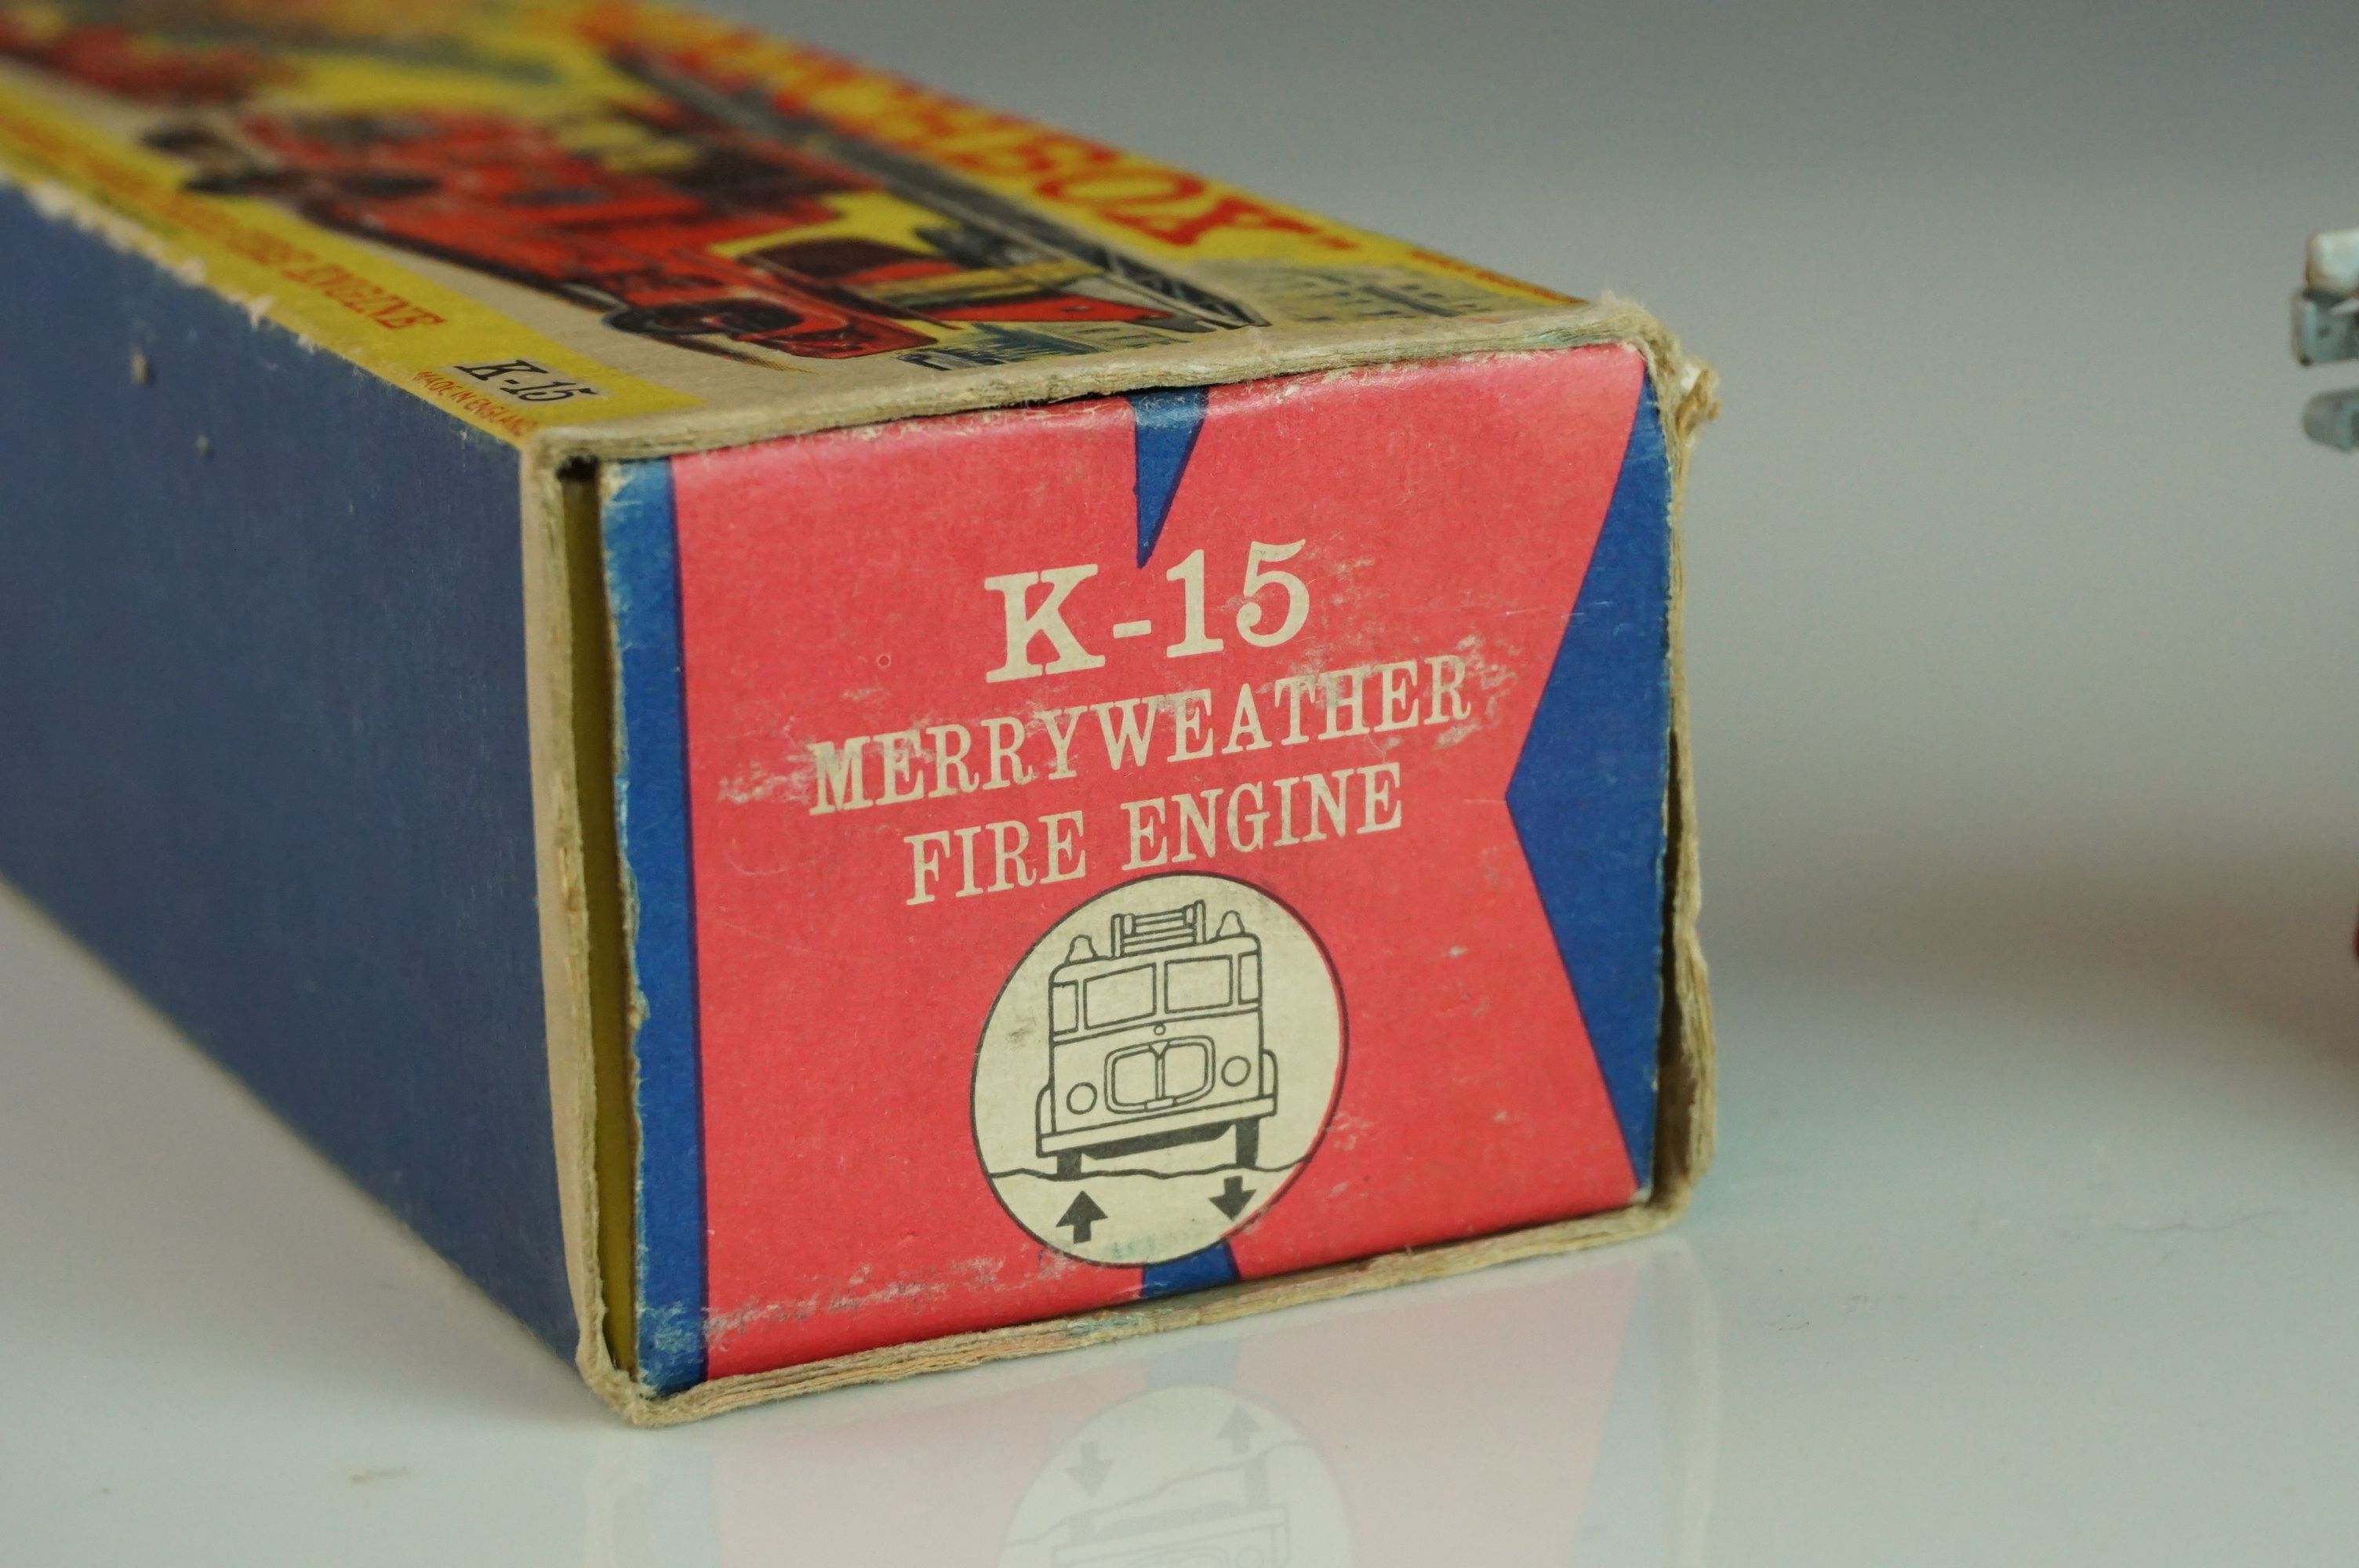 Boxed Matchbox K15 King Size Merryweather Fire Engine diecast model in vg condition with minimal - Image 7 of 8